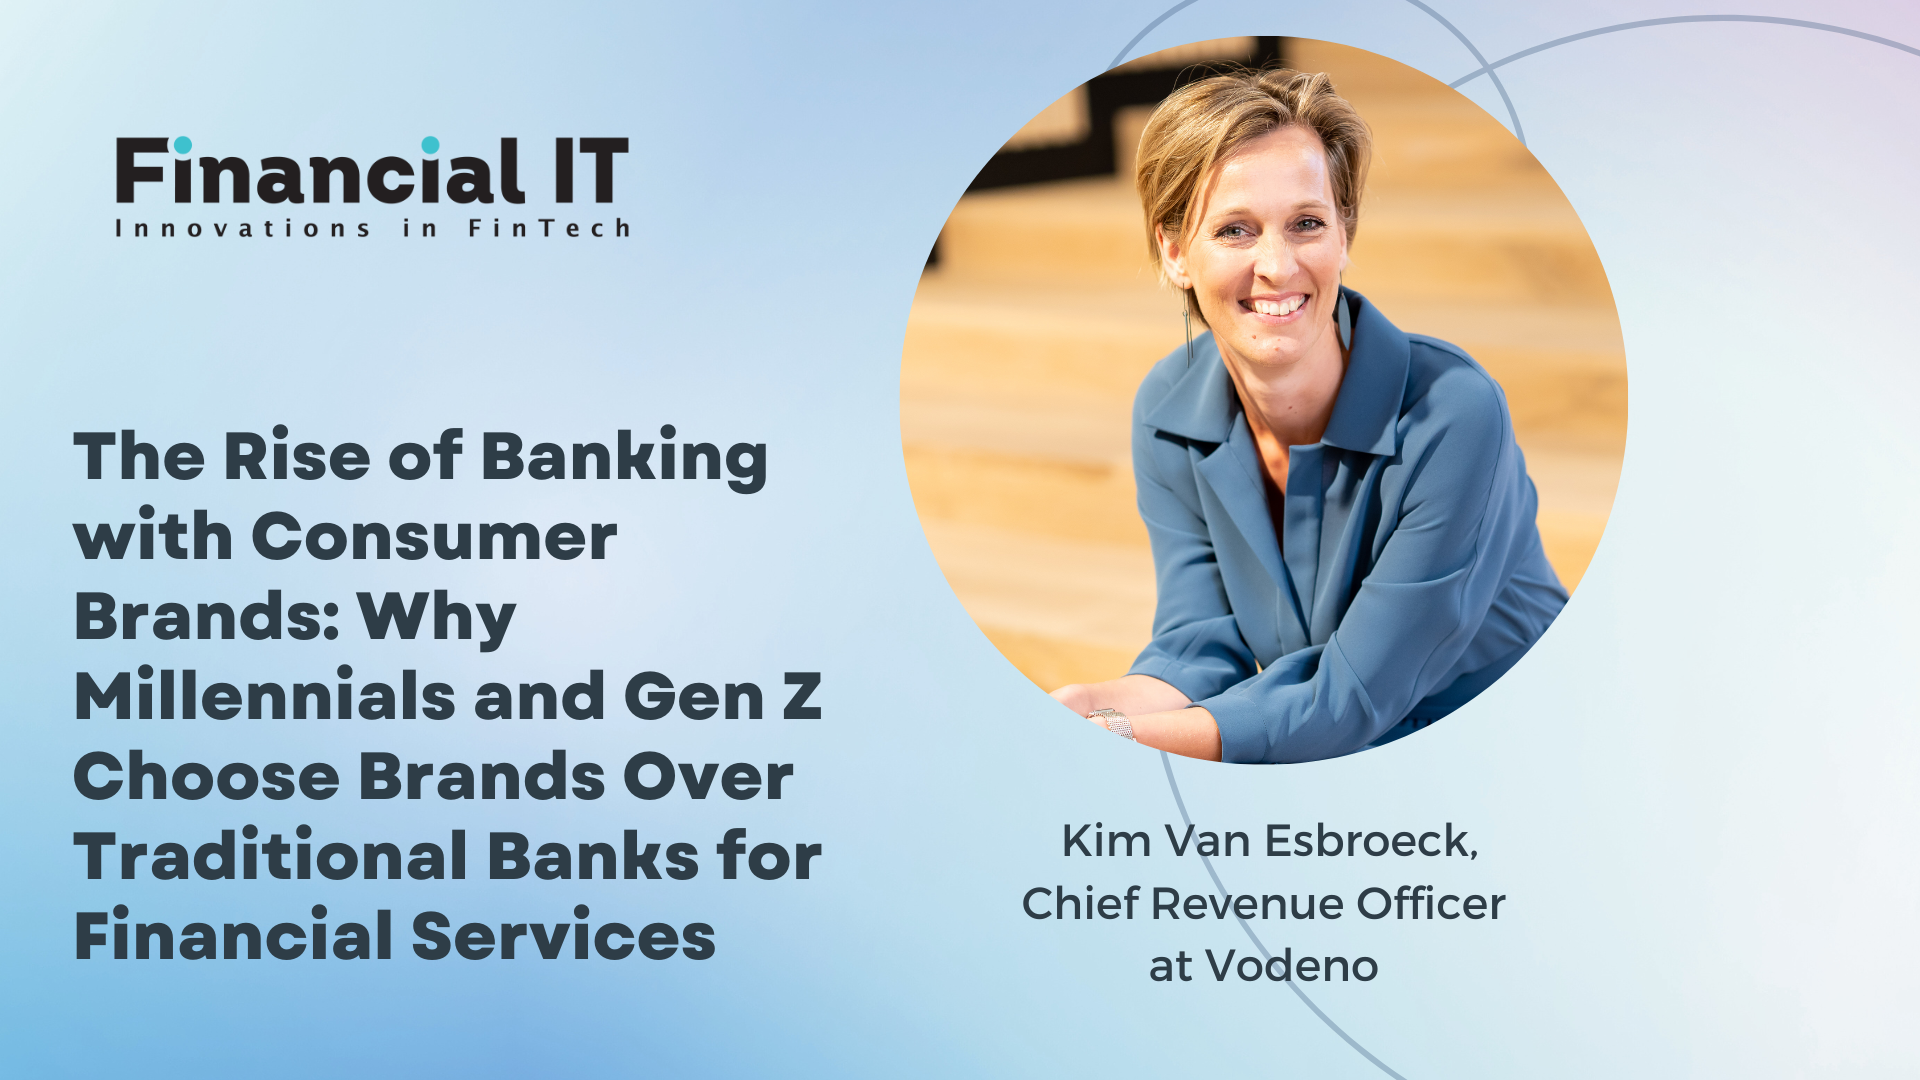 The Rise of Banking with Consumer Brands: Why Millennials and Gen Z Choose Brands Over Traditional Banks for Financial Services